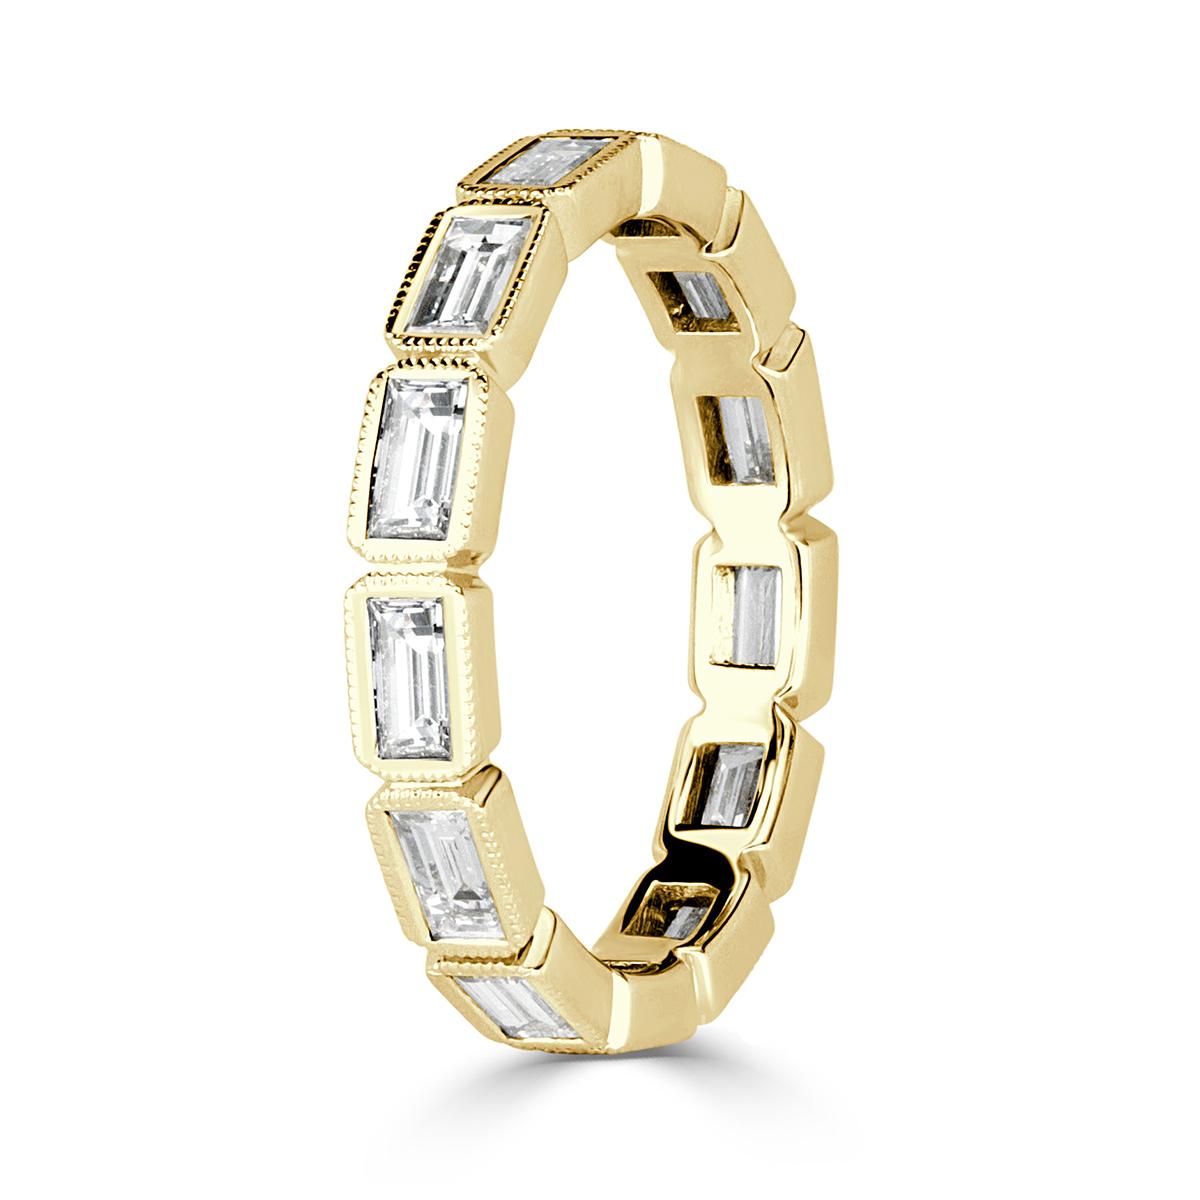 Created to perfection in 18k yellow gold, this stunning diamond eternity band showcases 1.40ct of perfectly matched baguette cut diamonds graded at E-F in color, VS1-VS2 in clarity. They are each accented with exquisite milgrain detain throughout.